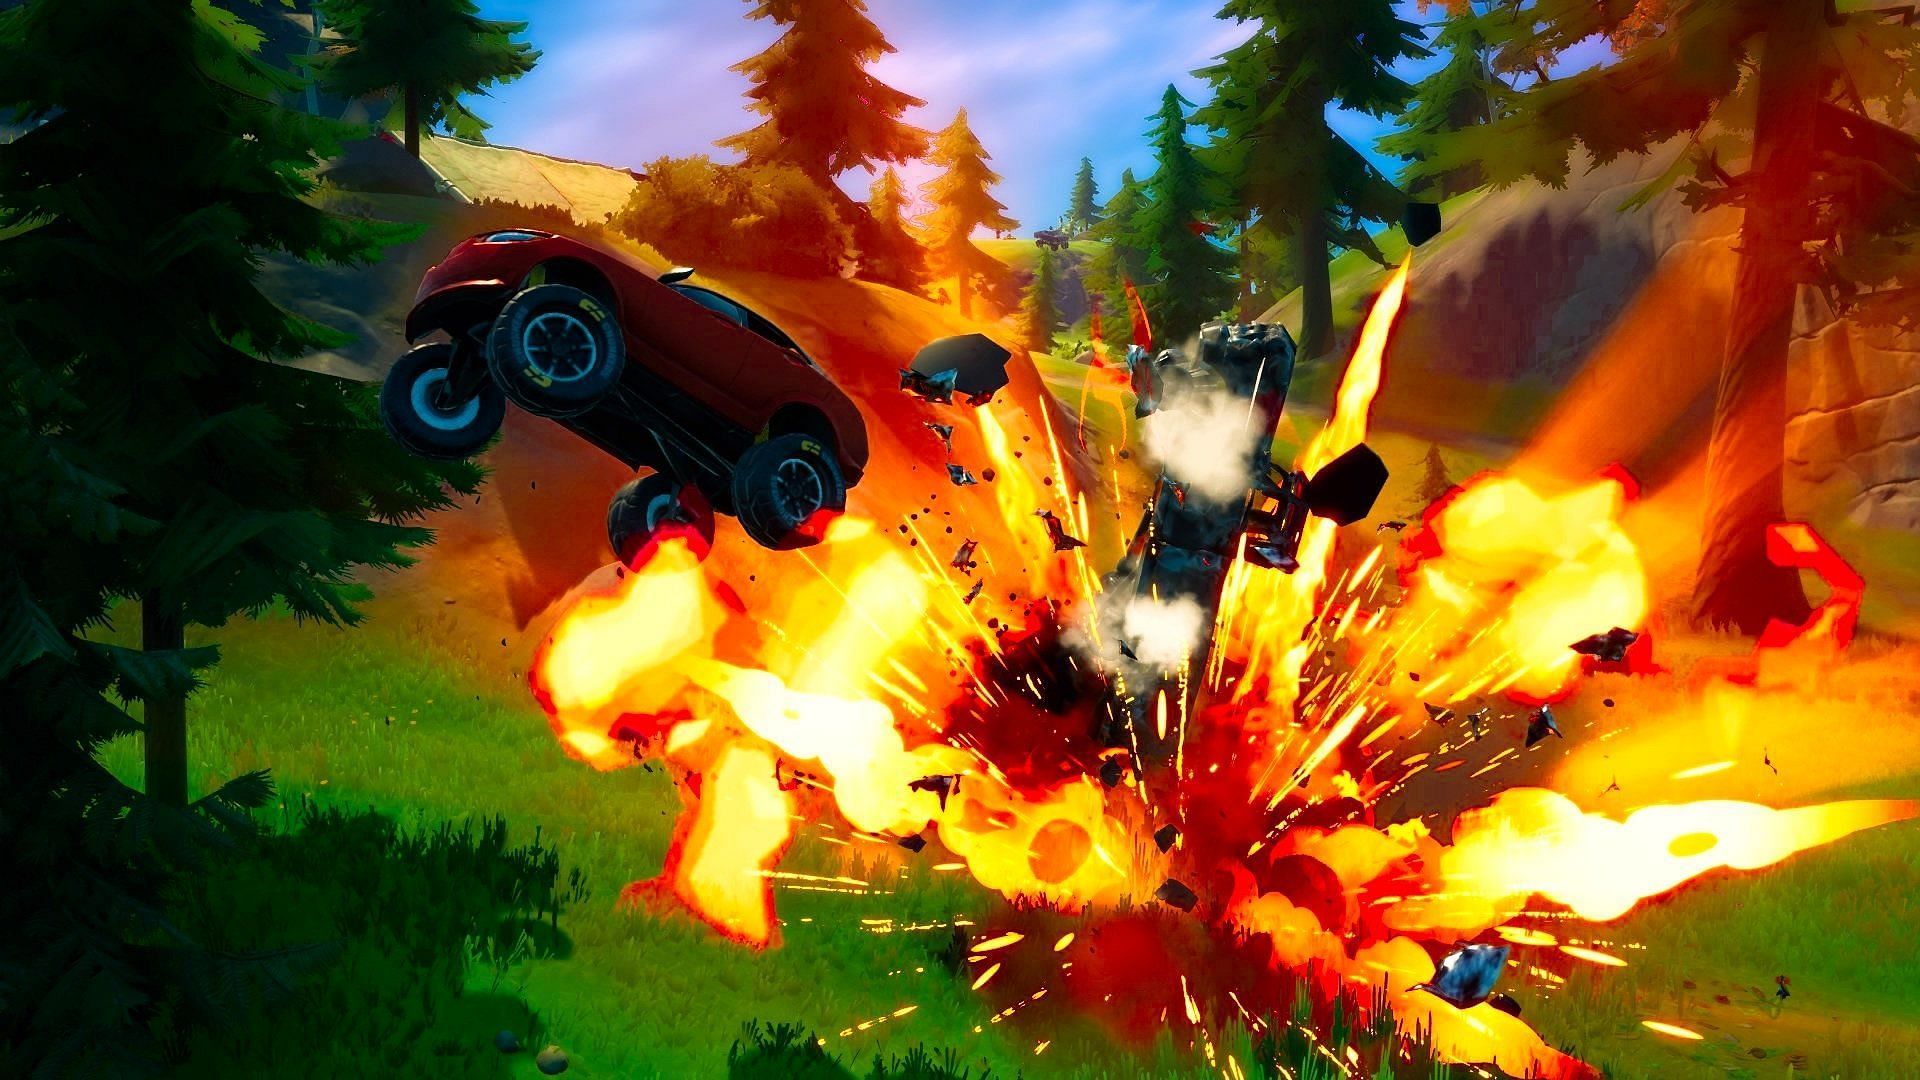 Player creates a nuclear explosion using Gas Cans in Fortnite (Image via Twitter/saftpommes)